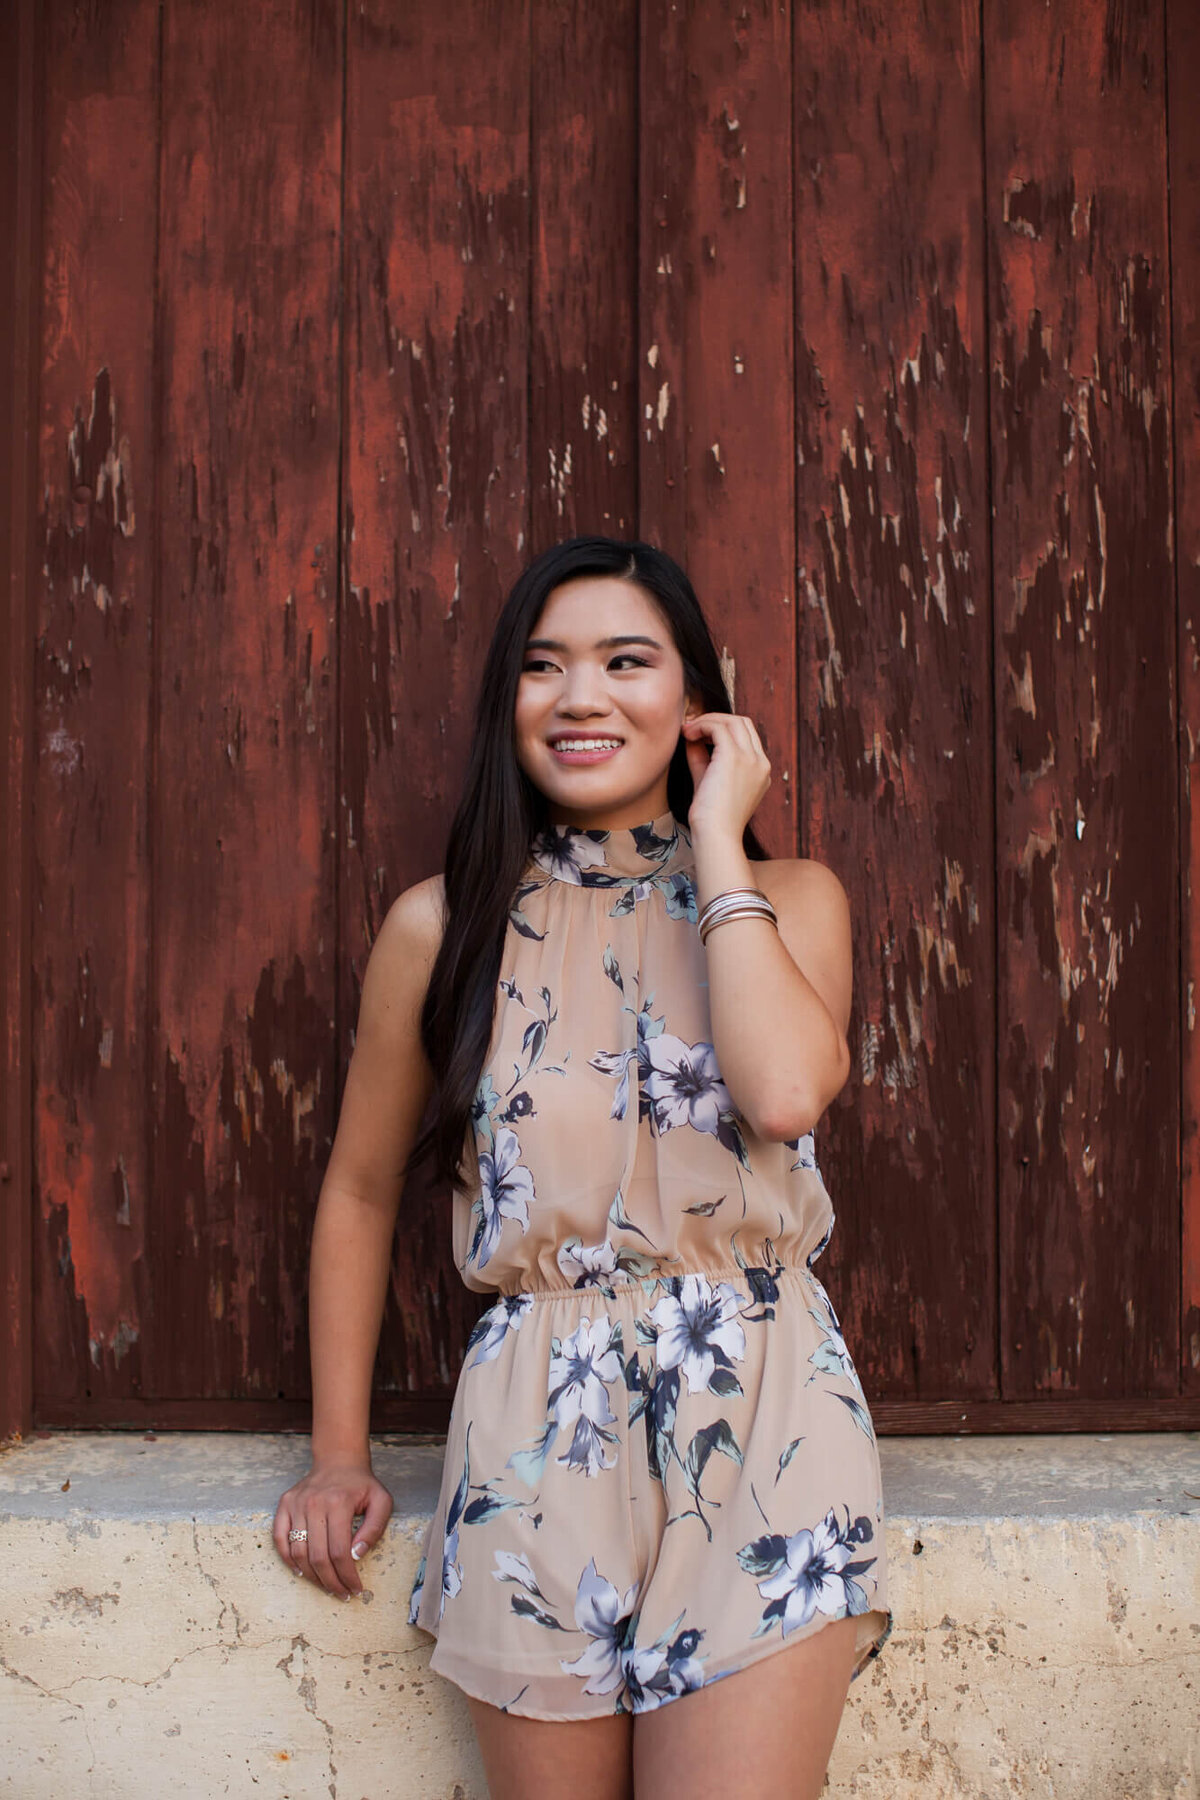 A lovely Asian American girl poses for her senior portraits wearing a floral blush chiffon romper leaning on a window sill with boarded up windows. Captured by Springfield, MO senior photographer Dynae Levingston.